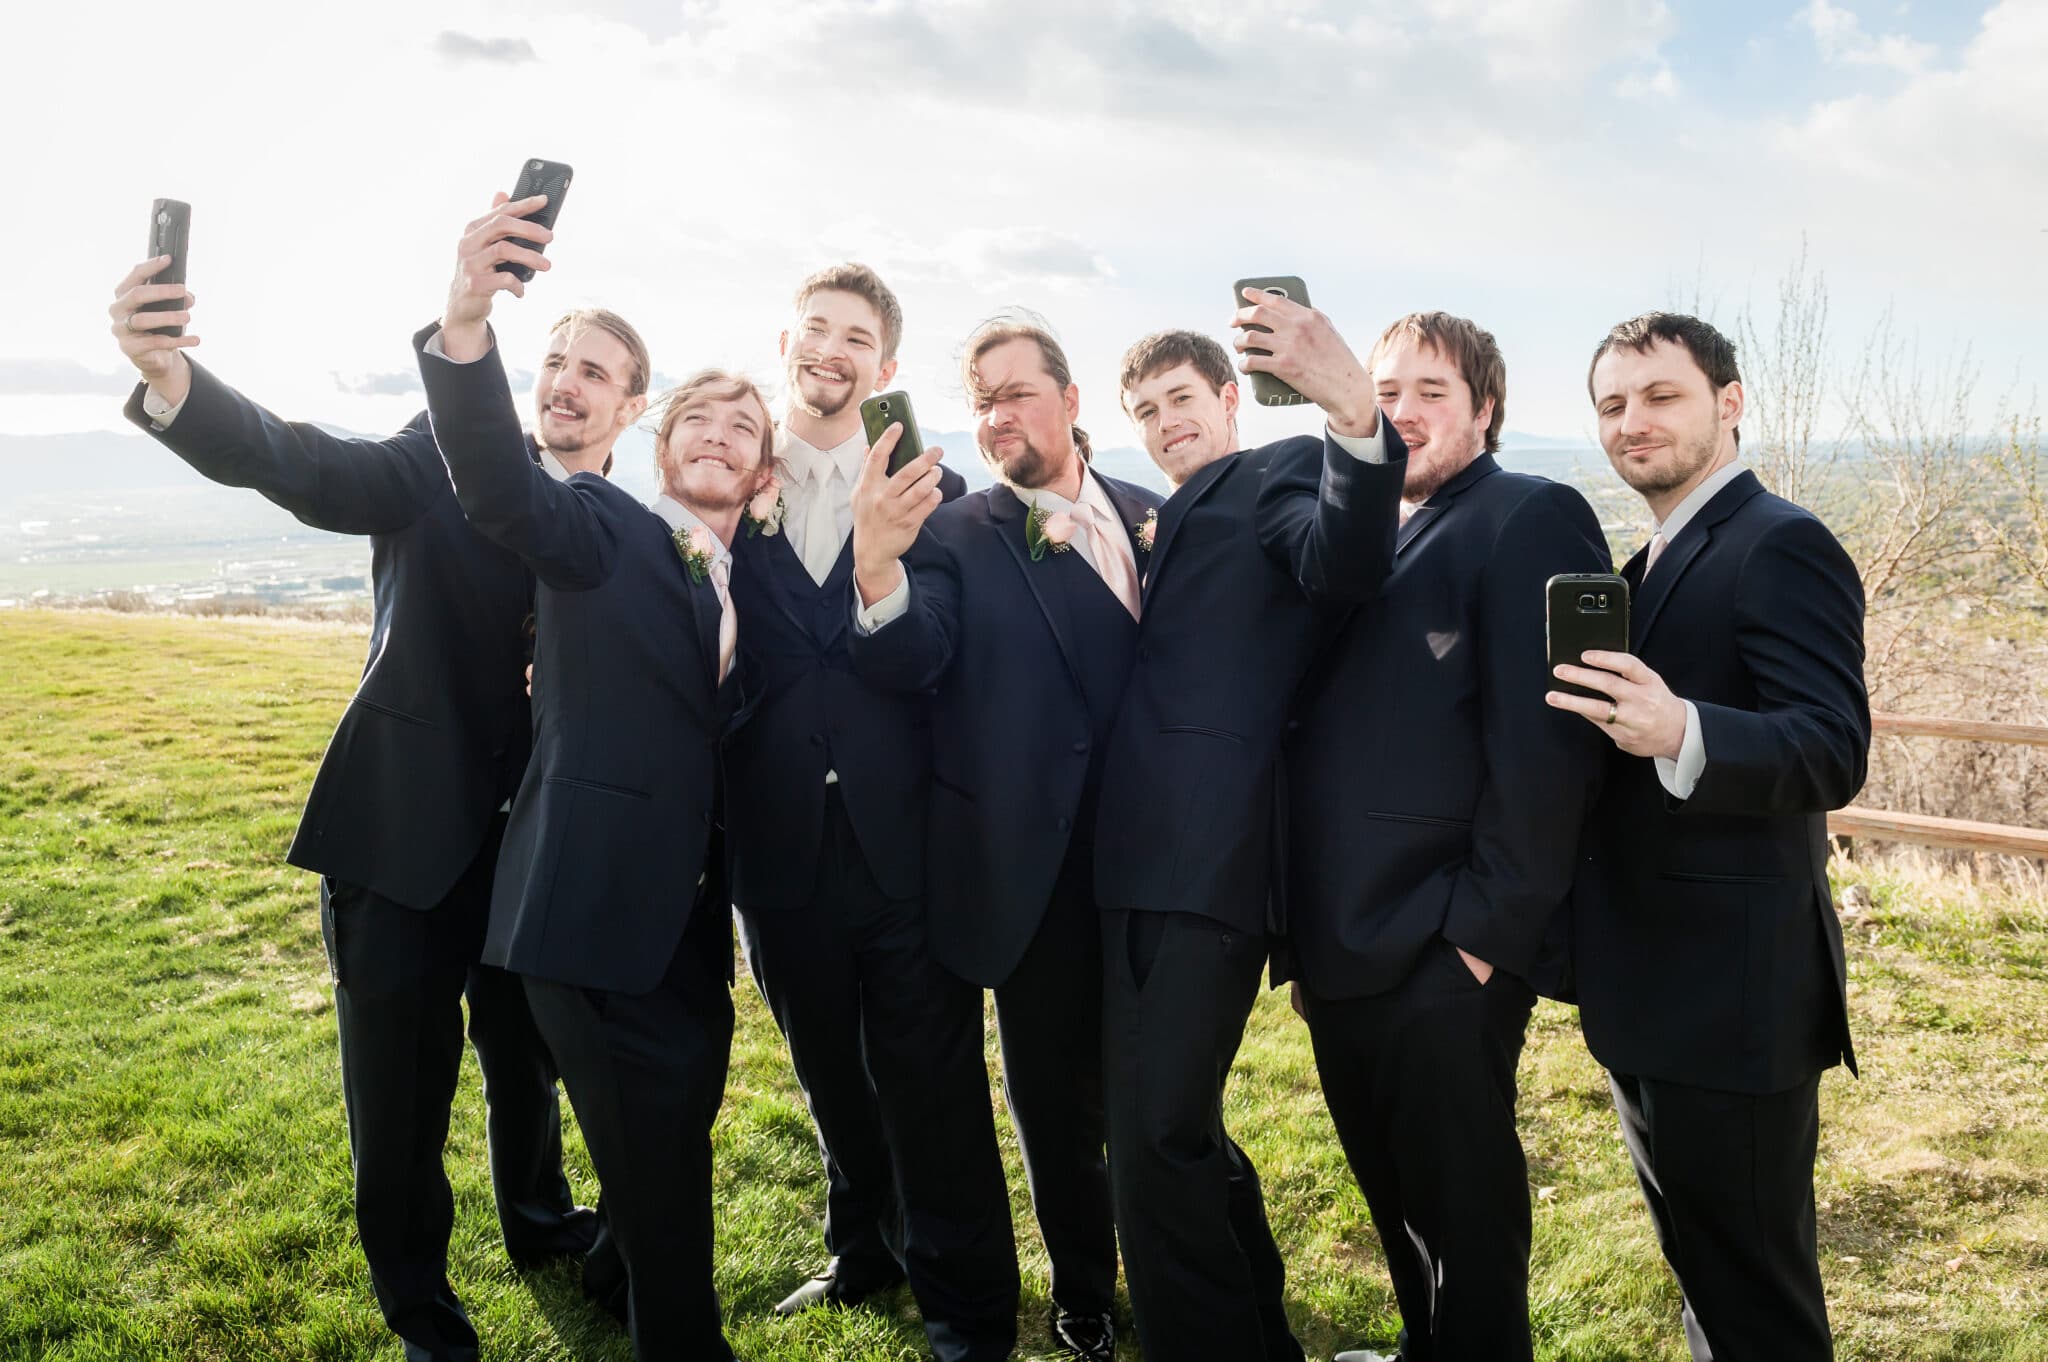 Groomsmen take selfies of themselves during an outdoor wedding at a public golf course.